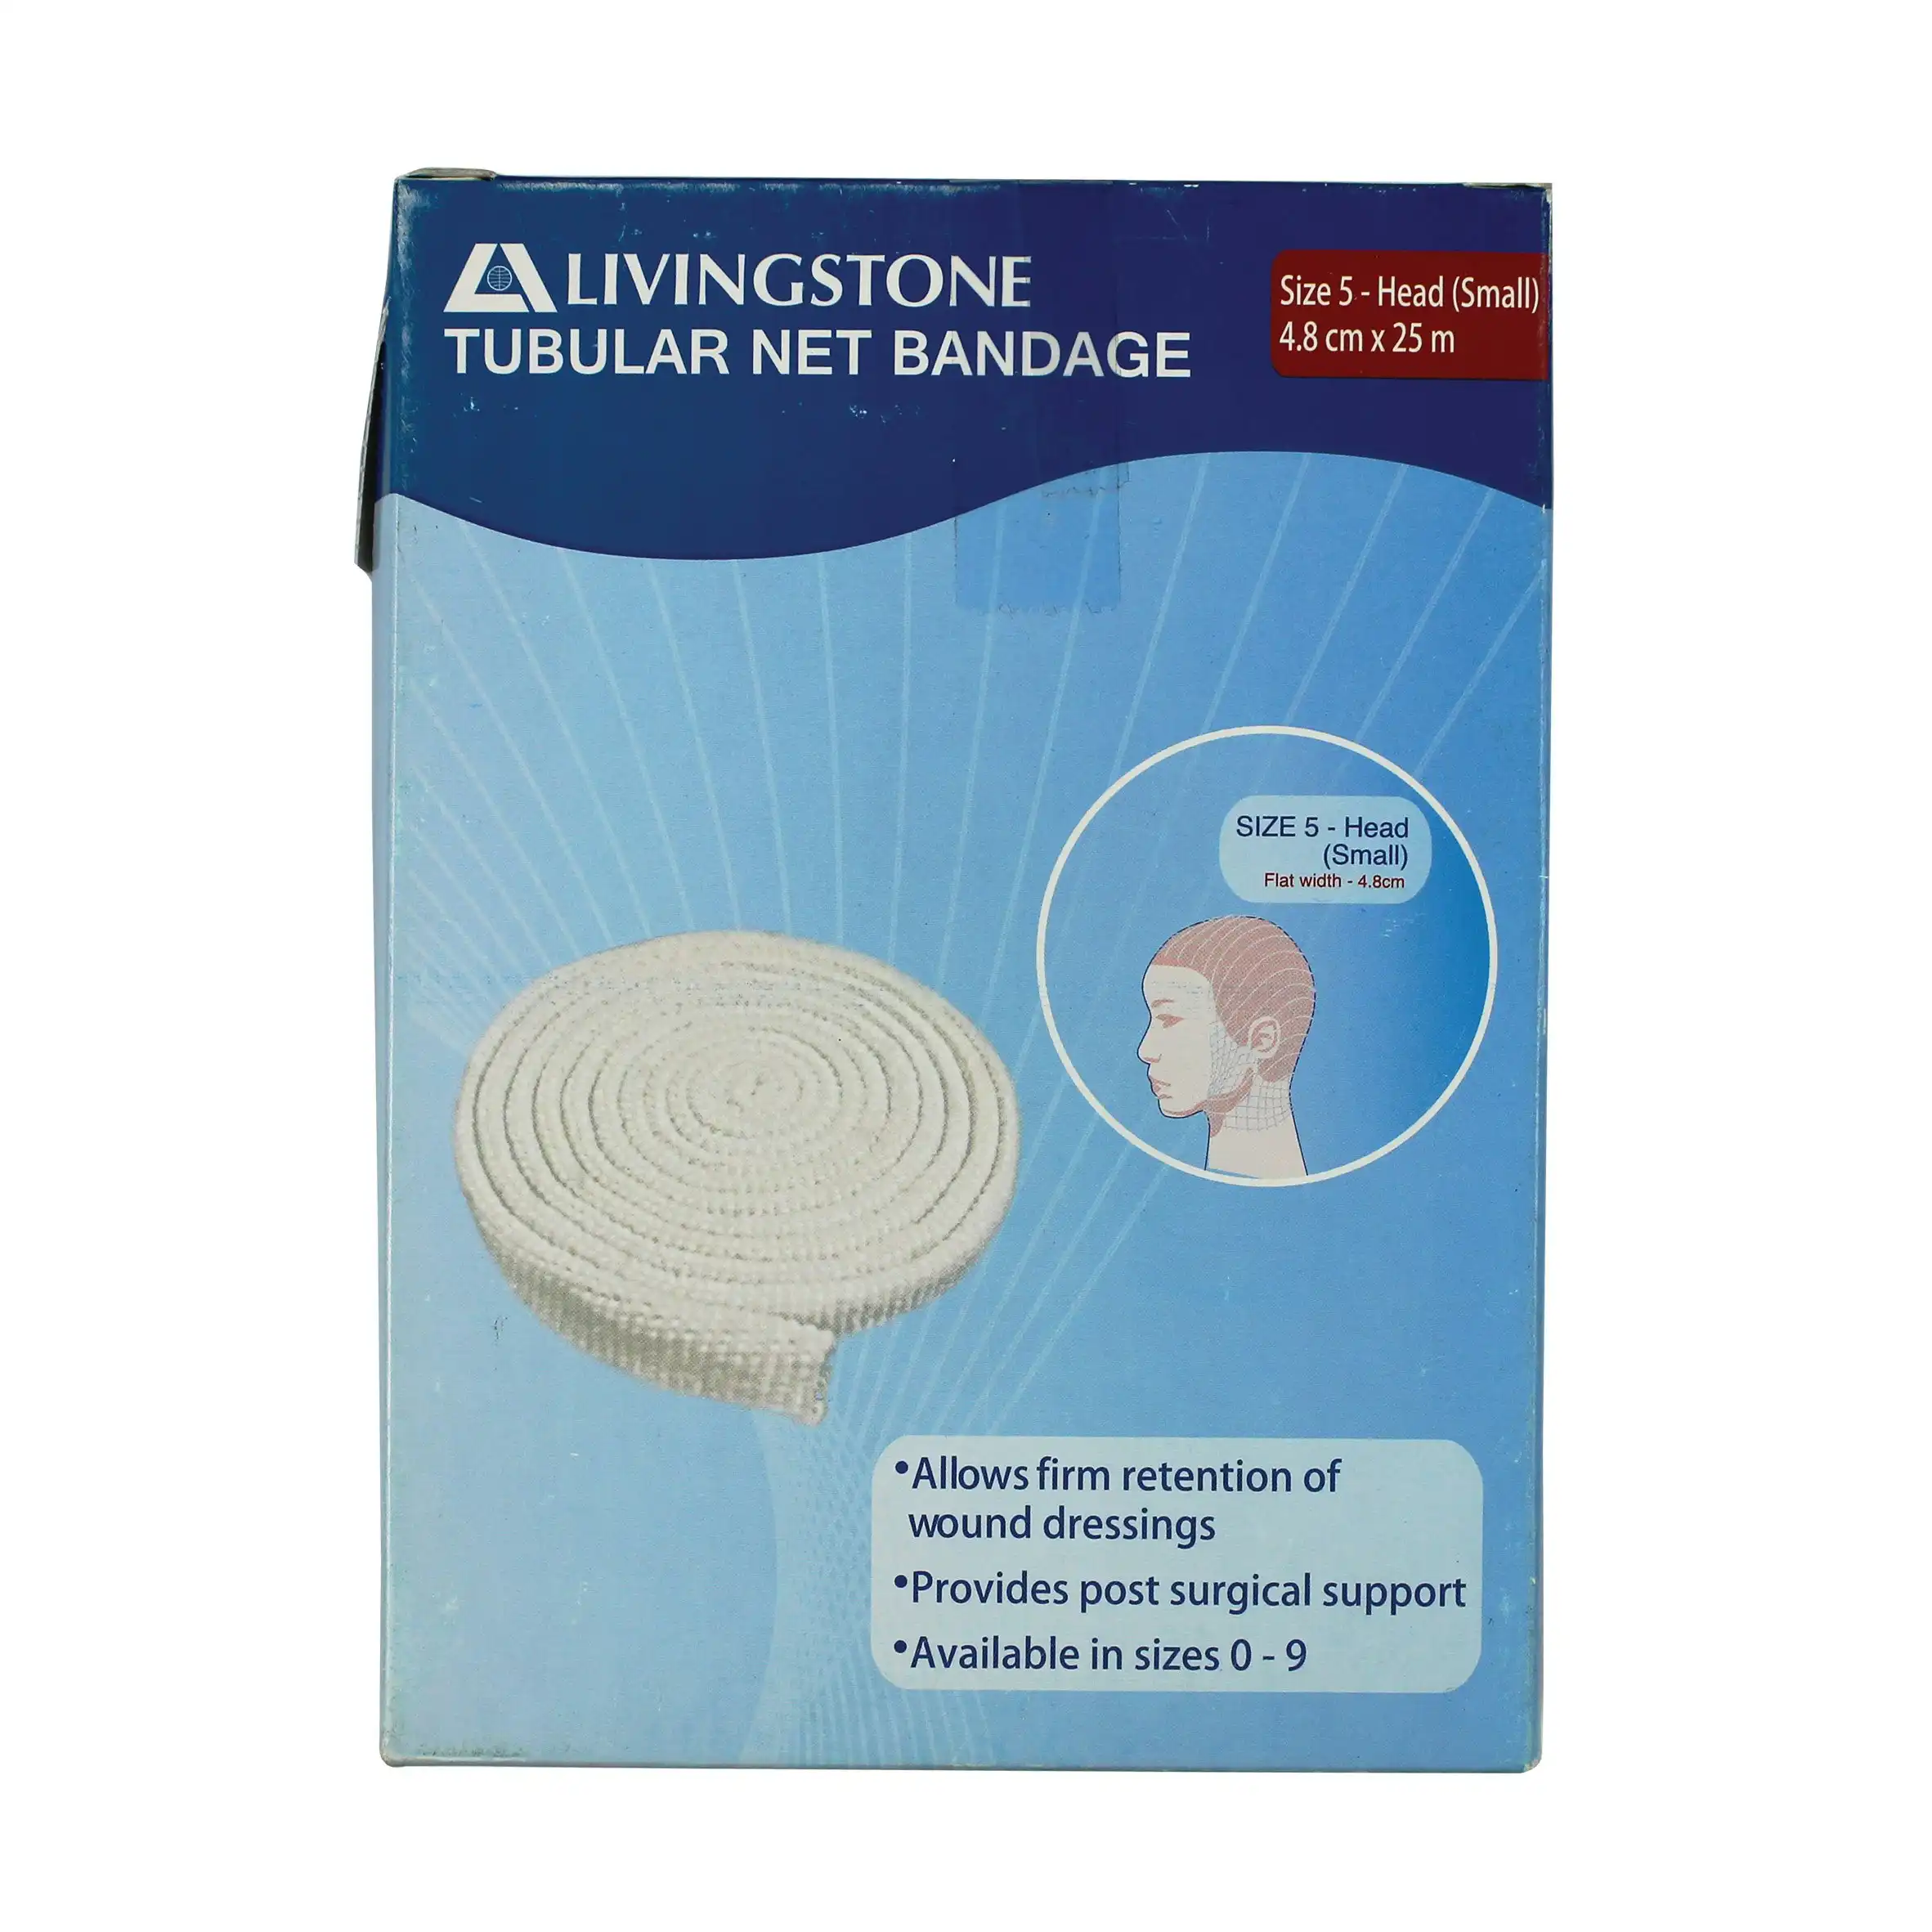 Livingstone Tubular Net Bandage Size F No. 5 Small Head Flat Width 48mm 7.5m (unstretched) 25m (stretched)